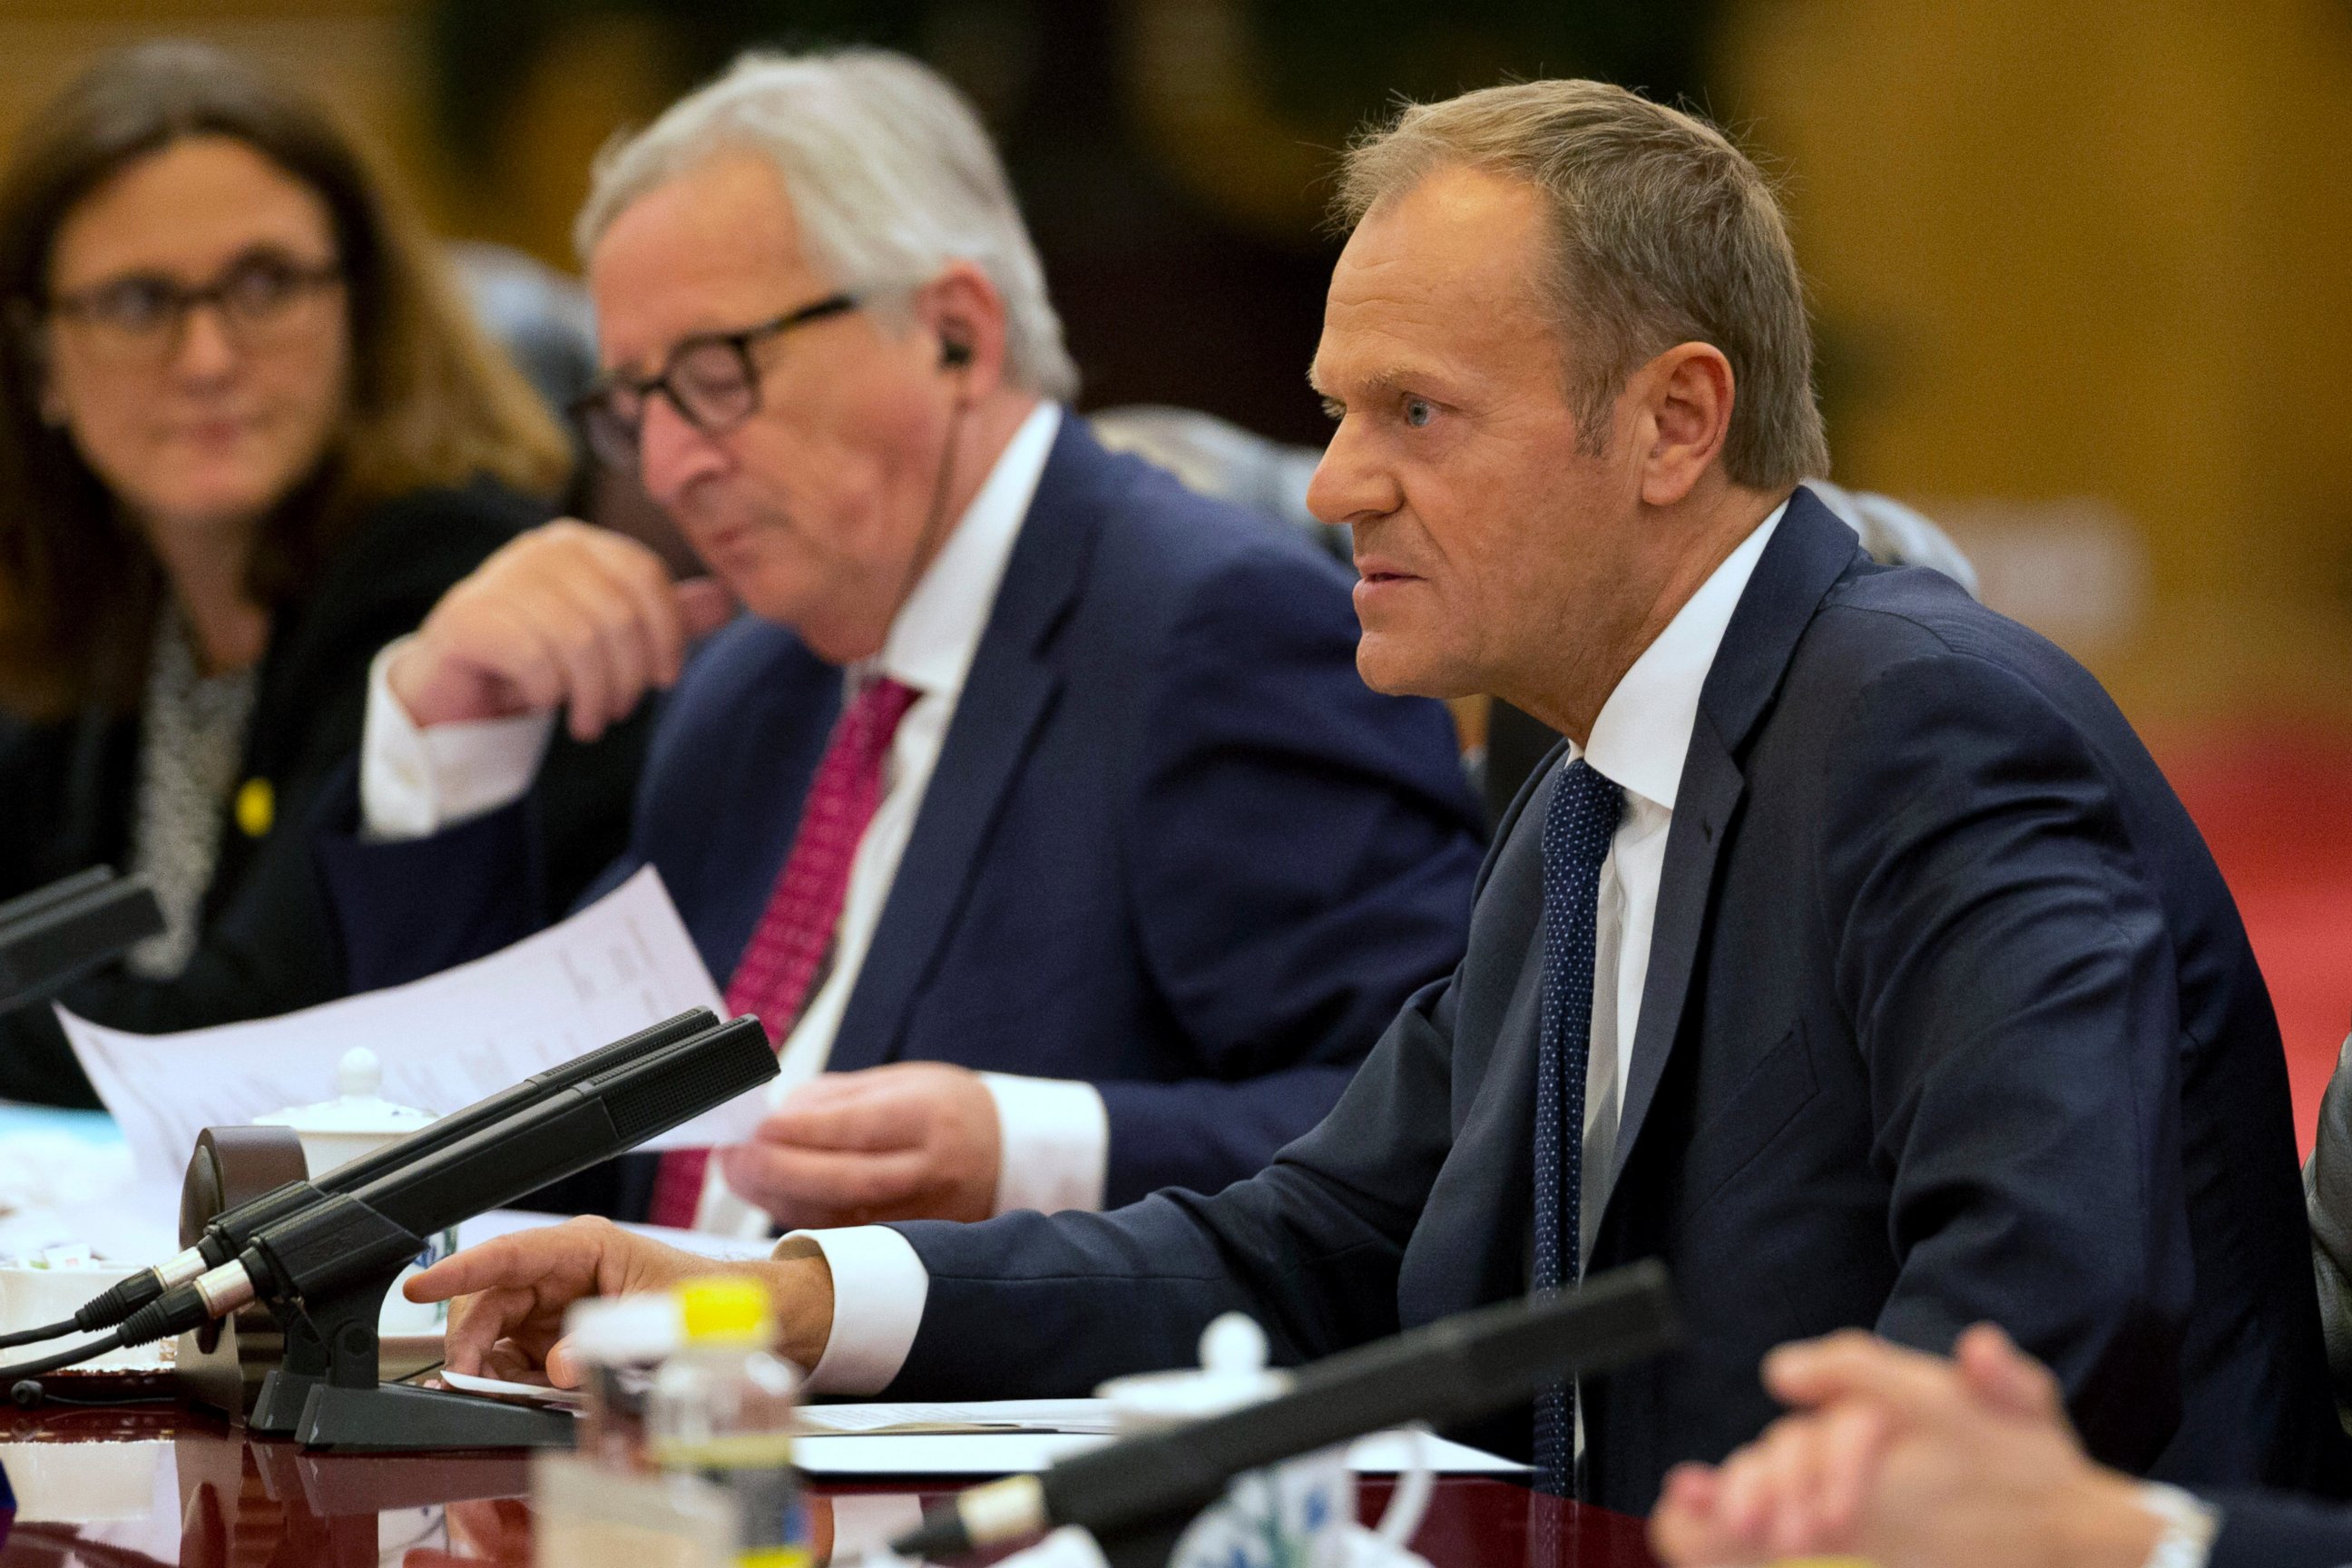 European Council President Donald Tusk, right speaks near European Commission President Jean-Claude Juncker during a meeting with Chinese Premier Li Keqiang, unseen at the Great Hall of the People in Beijing, China, Monday, July 16, 2018.